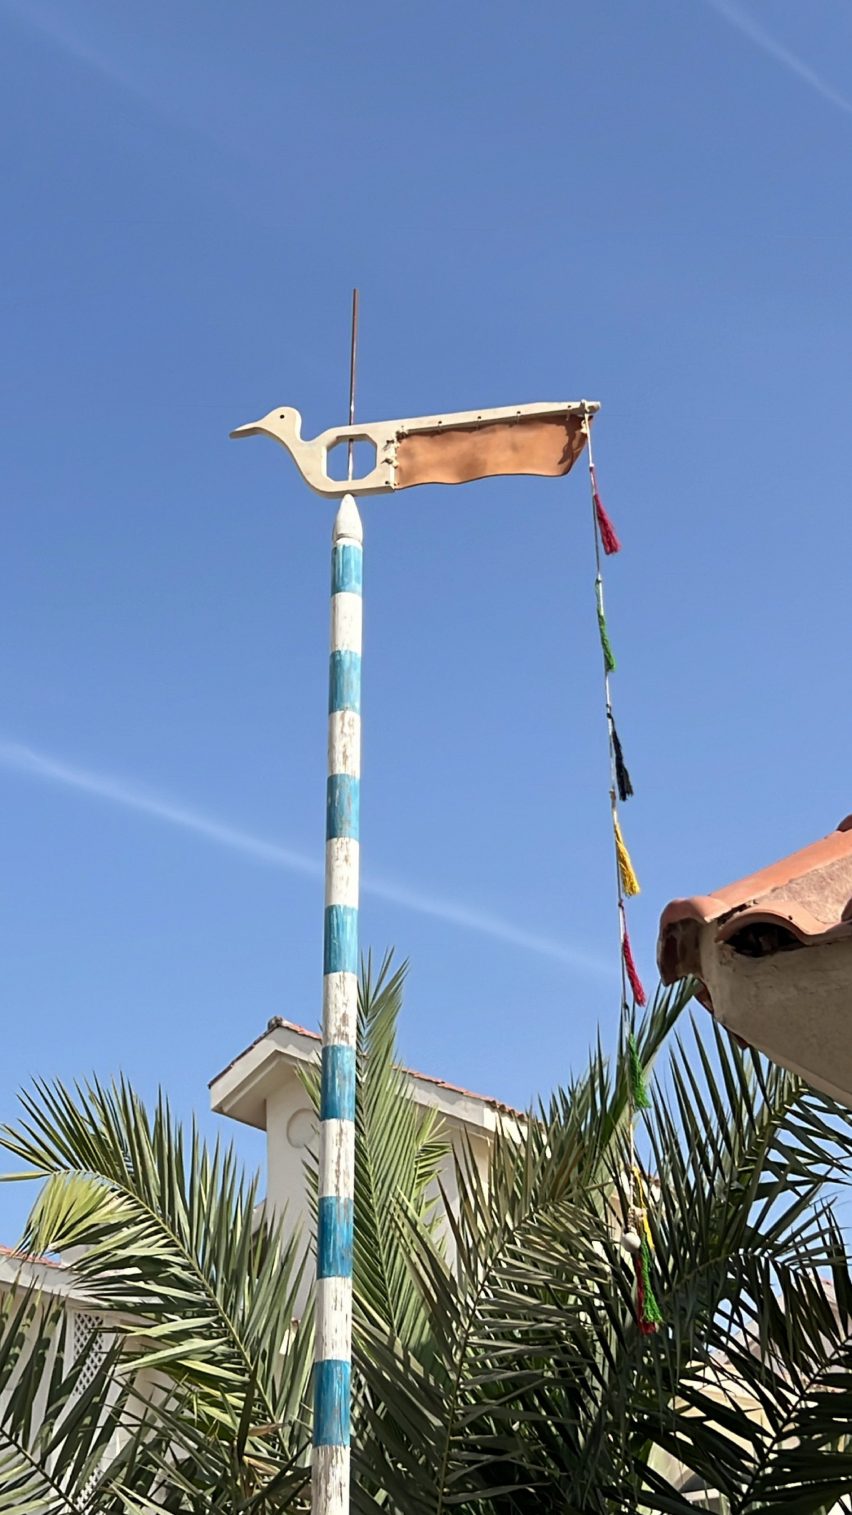 A photograph of a wooden pole in colours of blue and white stripes, with a bird figure on top. The pole is situated outside against a blue sky backdrop and a green plant.